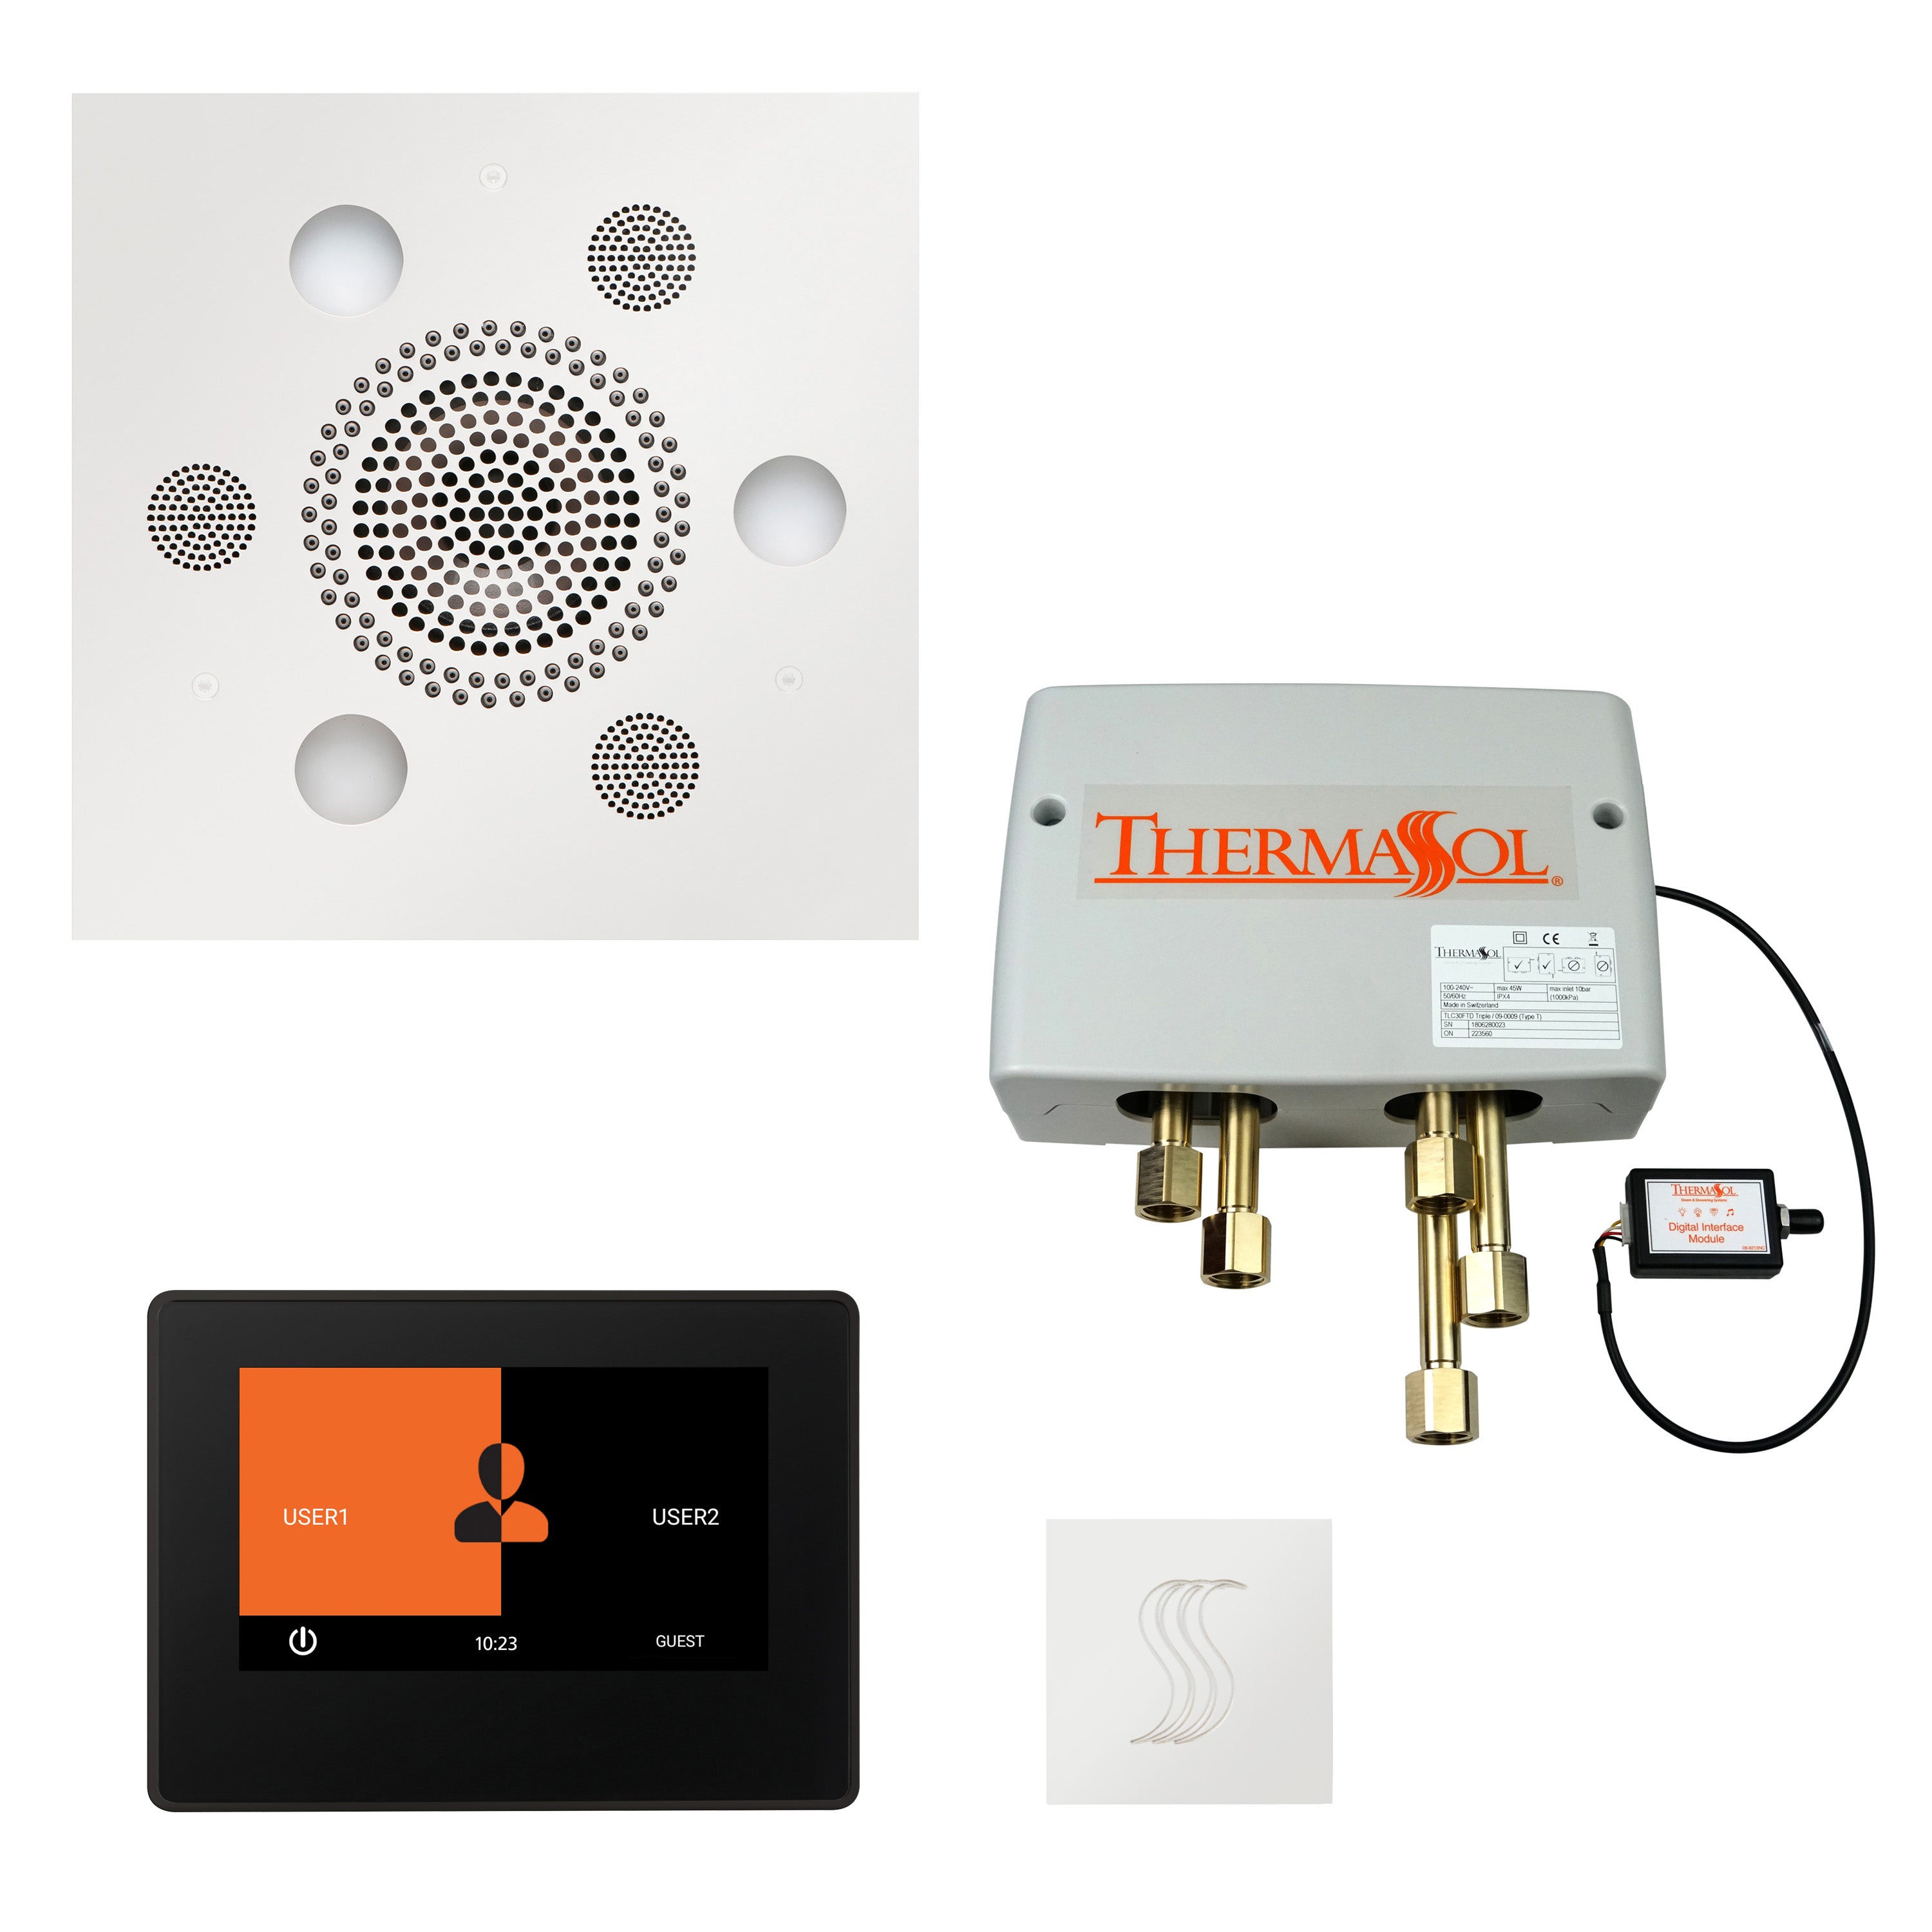 ThermaSol ThermaTouch 7", Digital Shower Valve, Serenity 10, SteamVection, Steam Shower